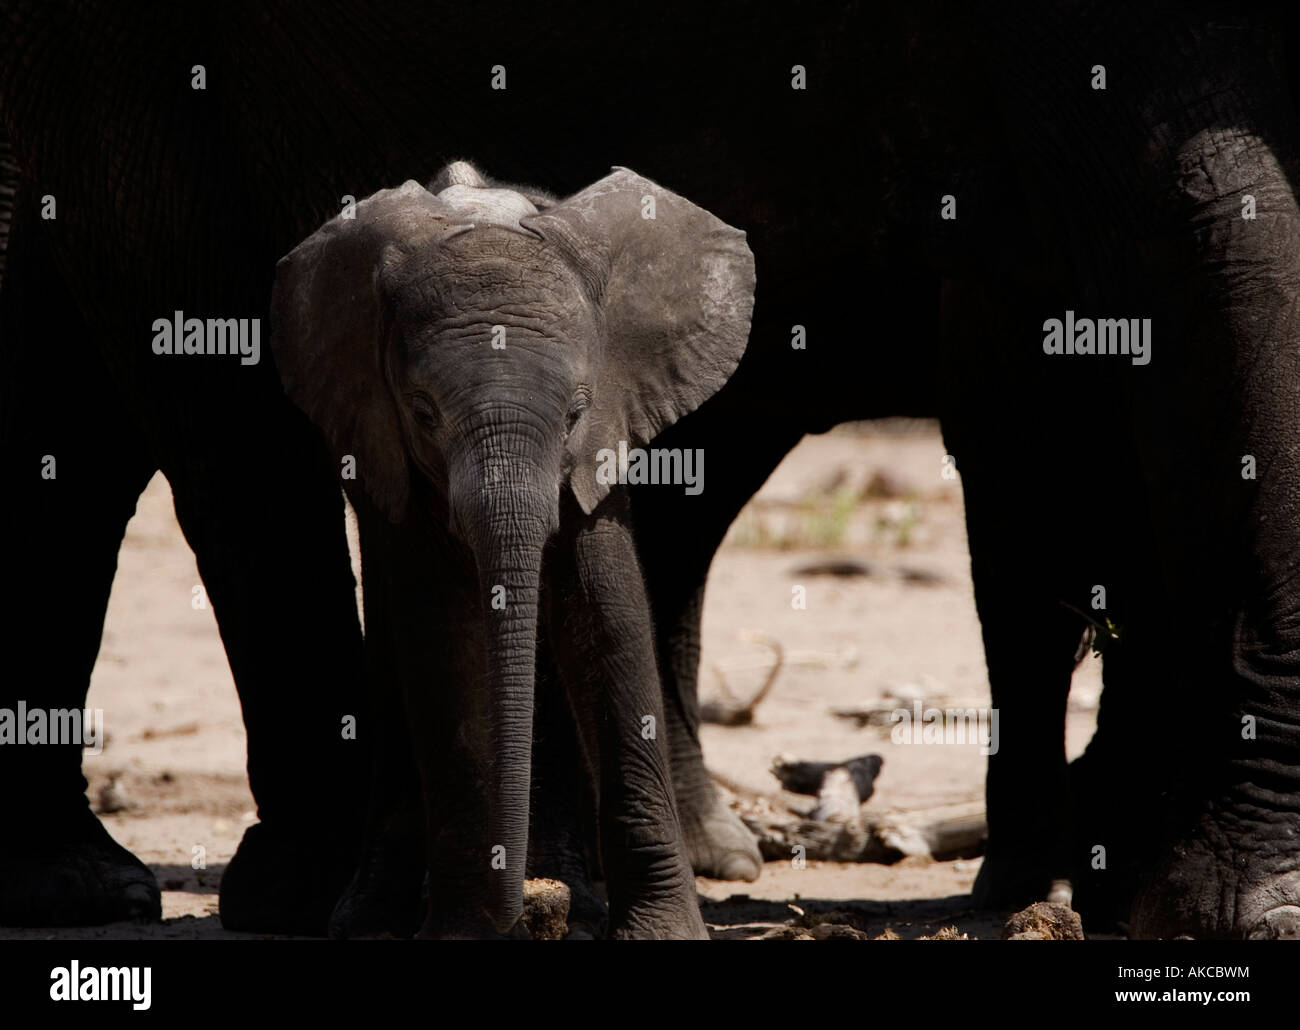 African elephant calf, loxodonta africana, is shaded by adult elephants in the Chobe National Park, game reserve in Botswana Stock Photo